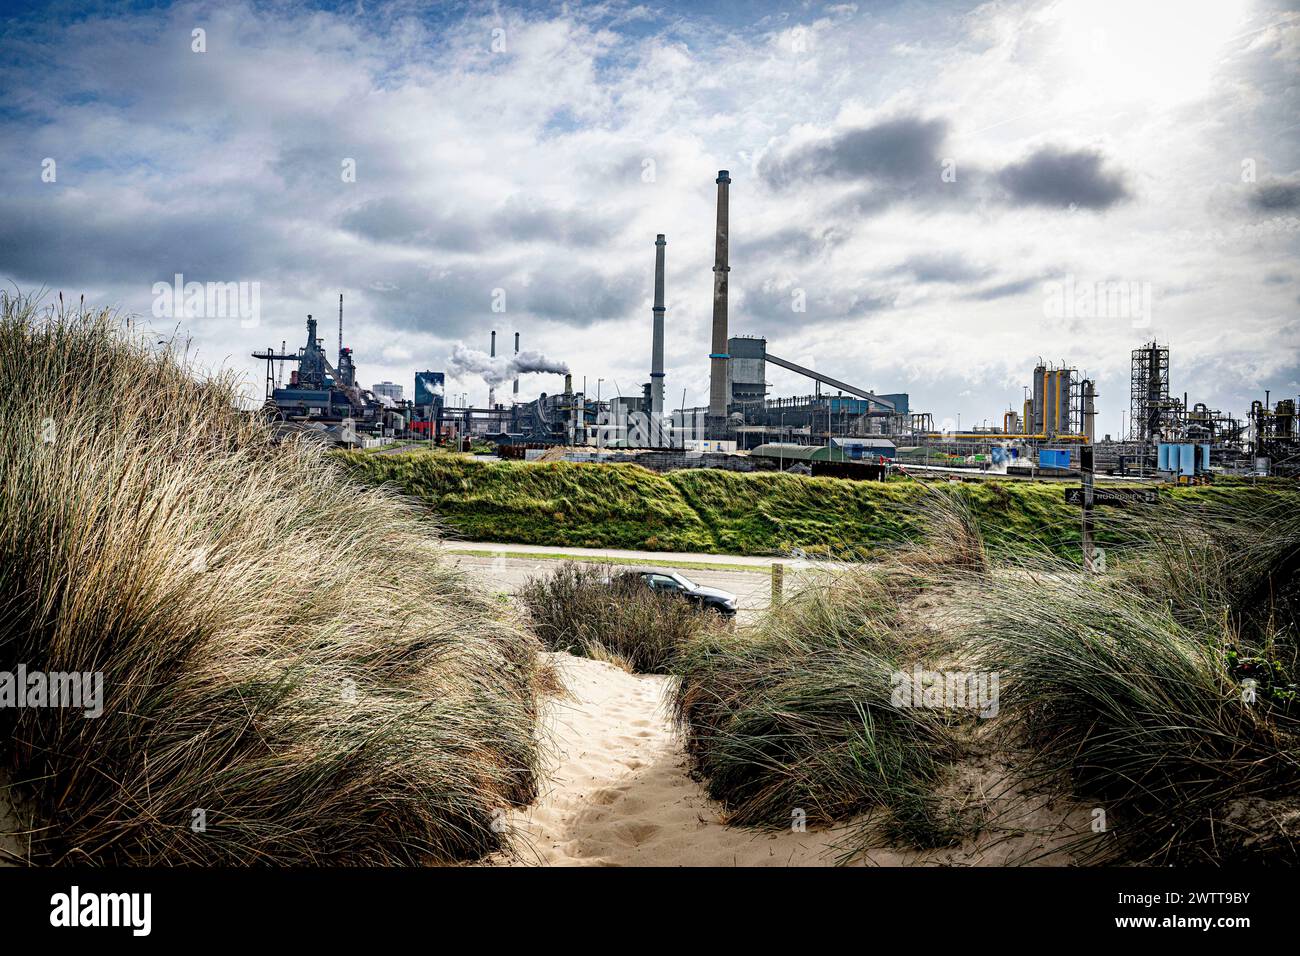 Contrasting elements with a serene beach in the foreground and an industrial landscape in the background Stock Photo